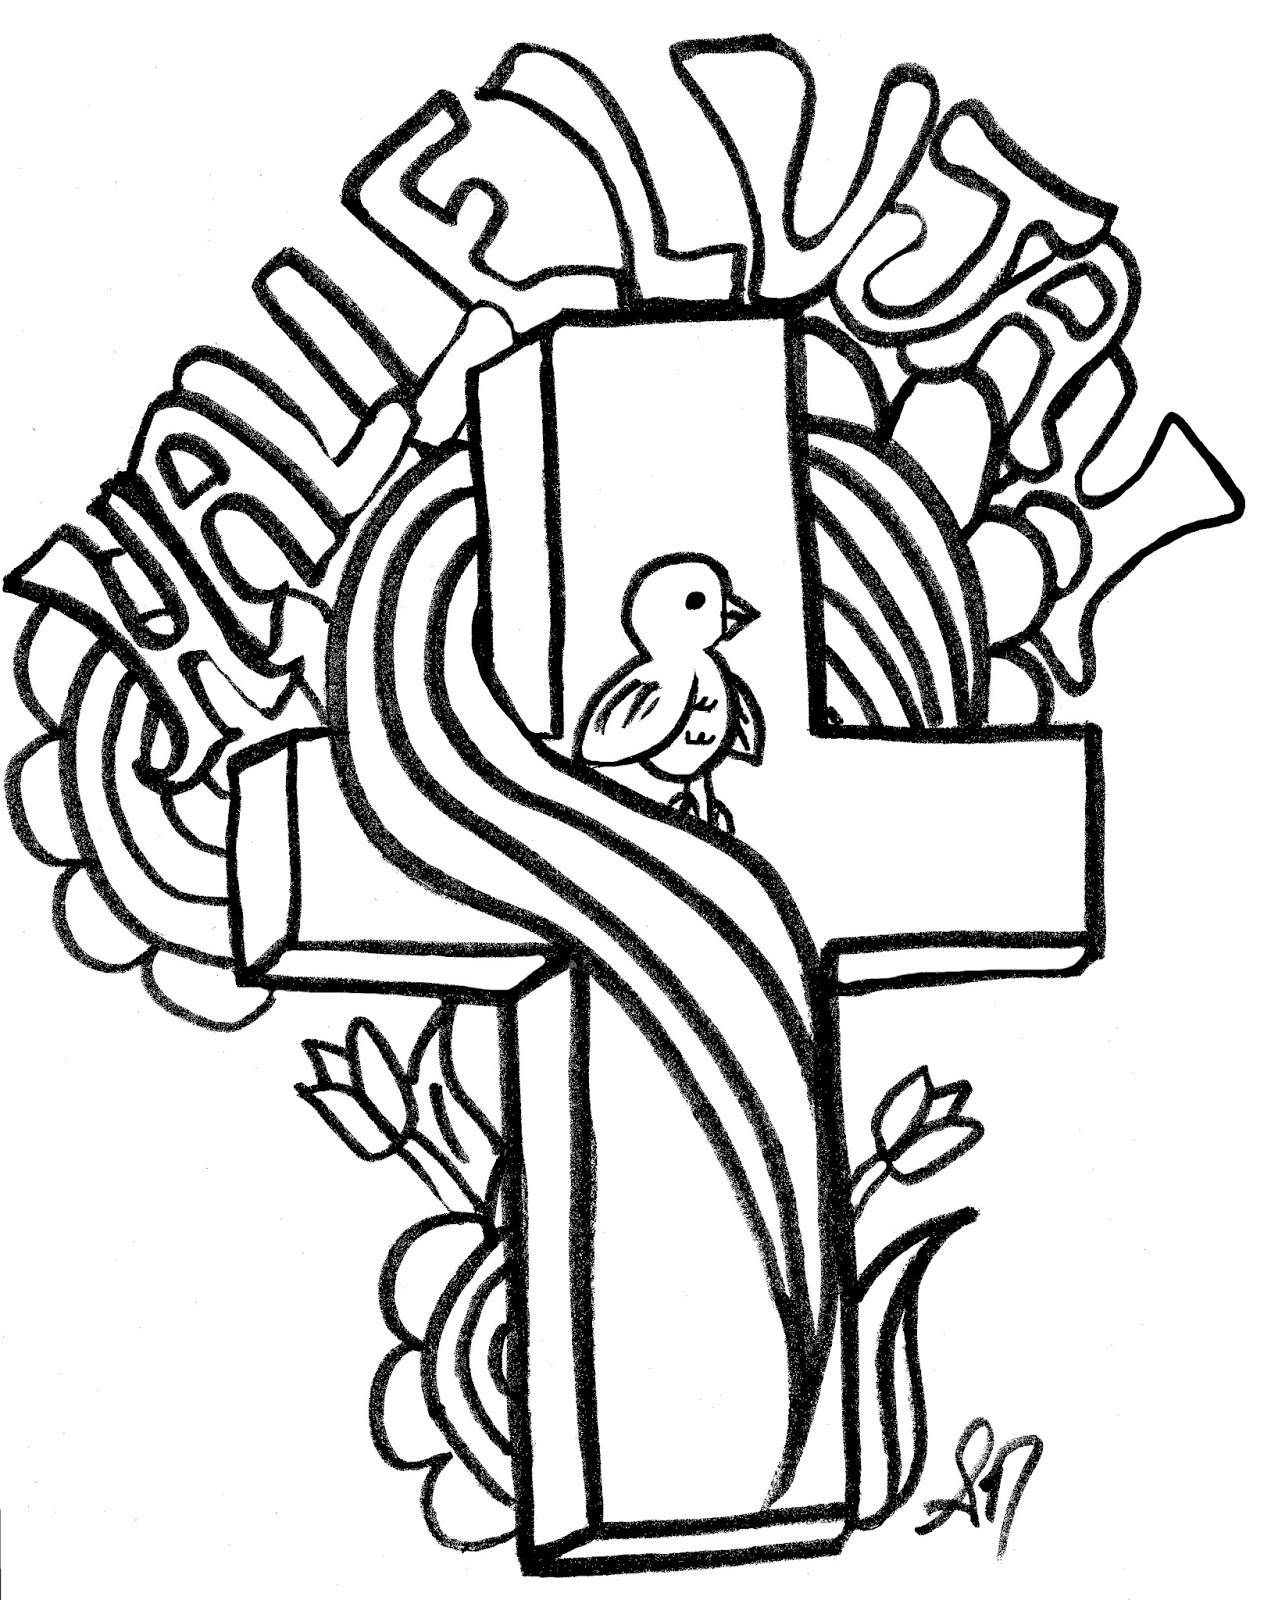 Hallelujah Bible Coloring Pages 1